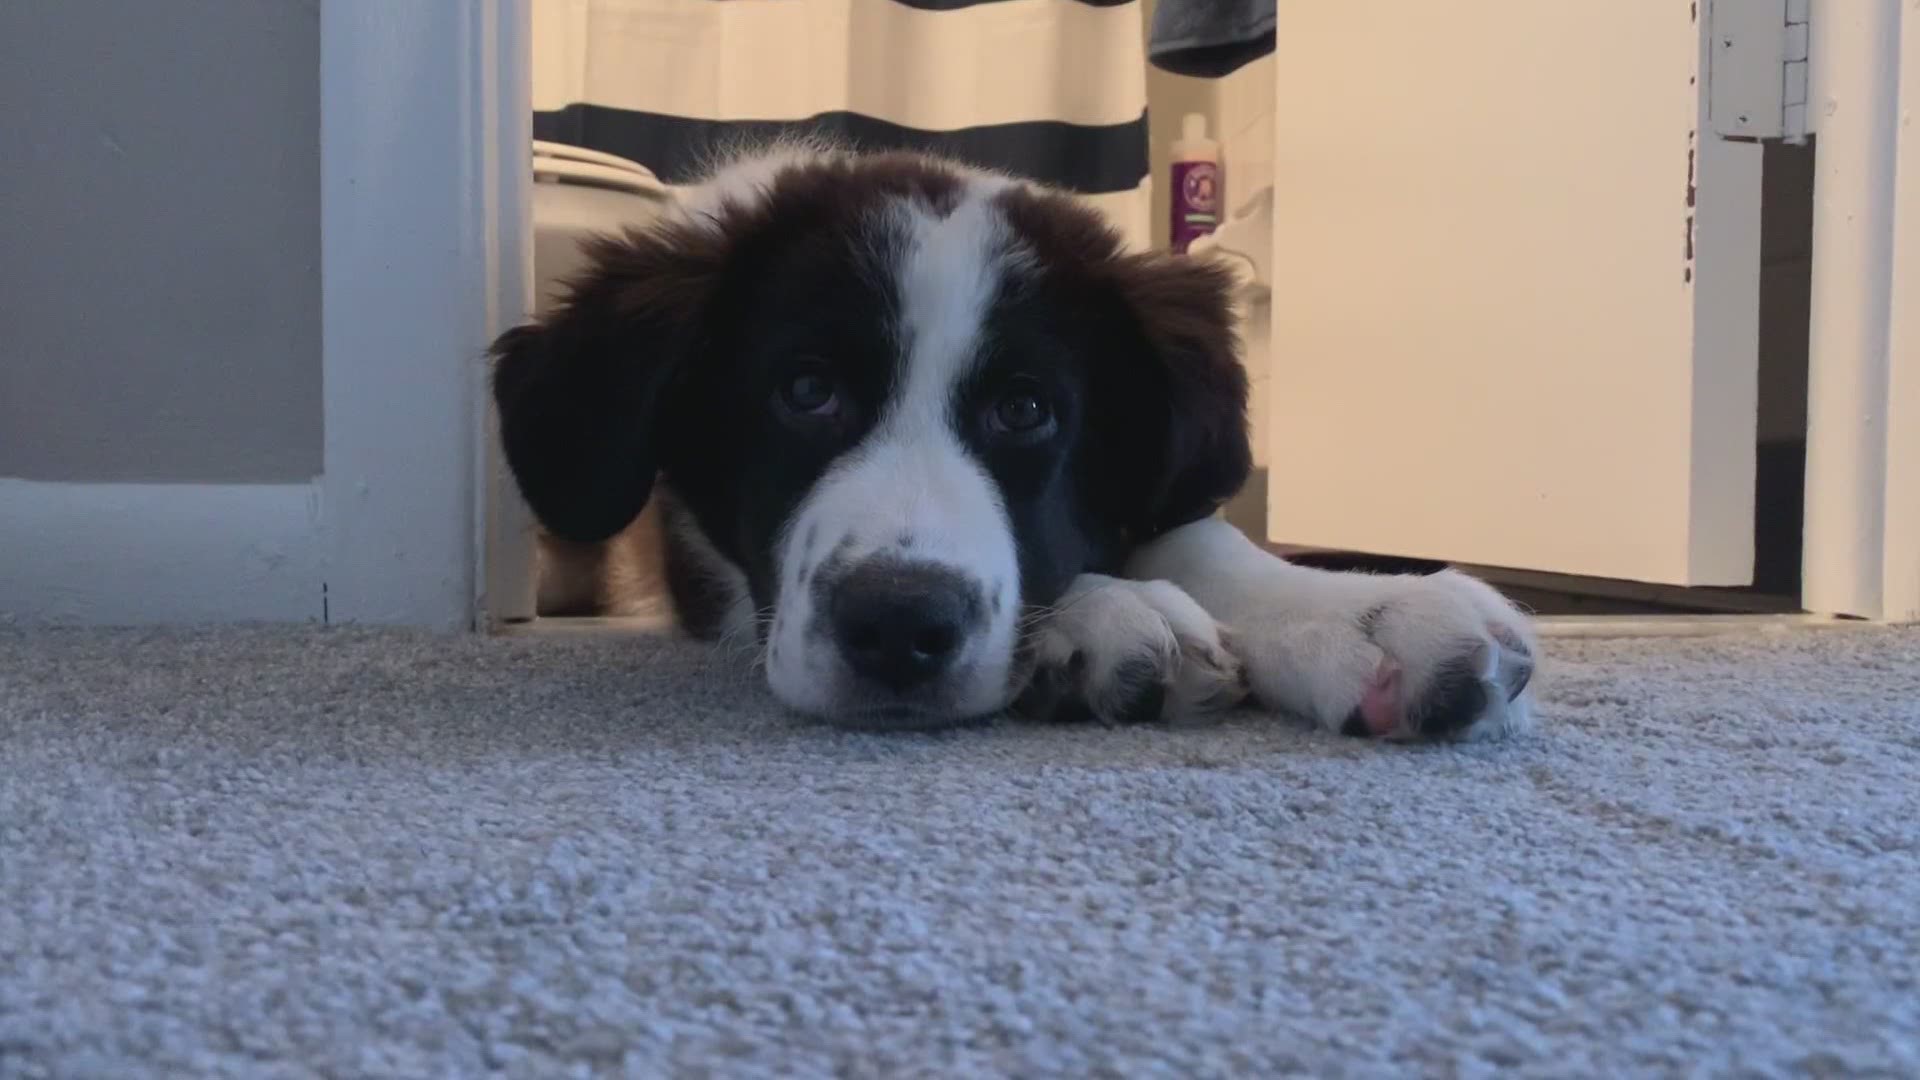 Atlas pup has a full day of naps, playtime, and more naps